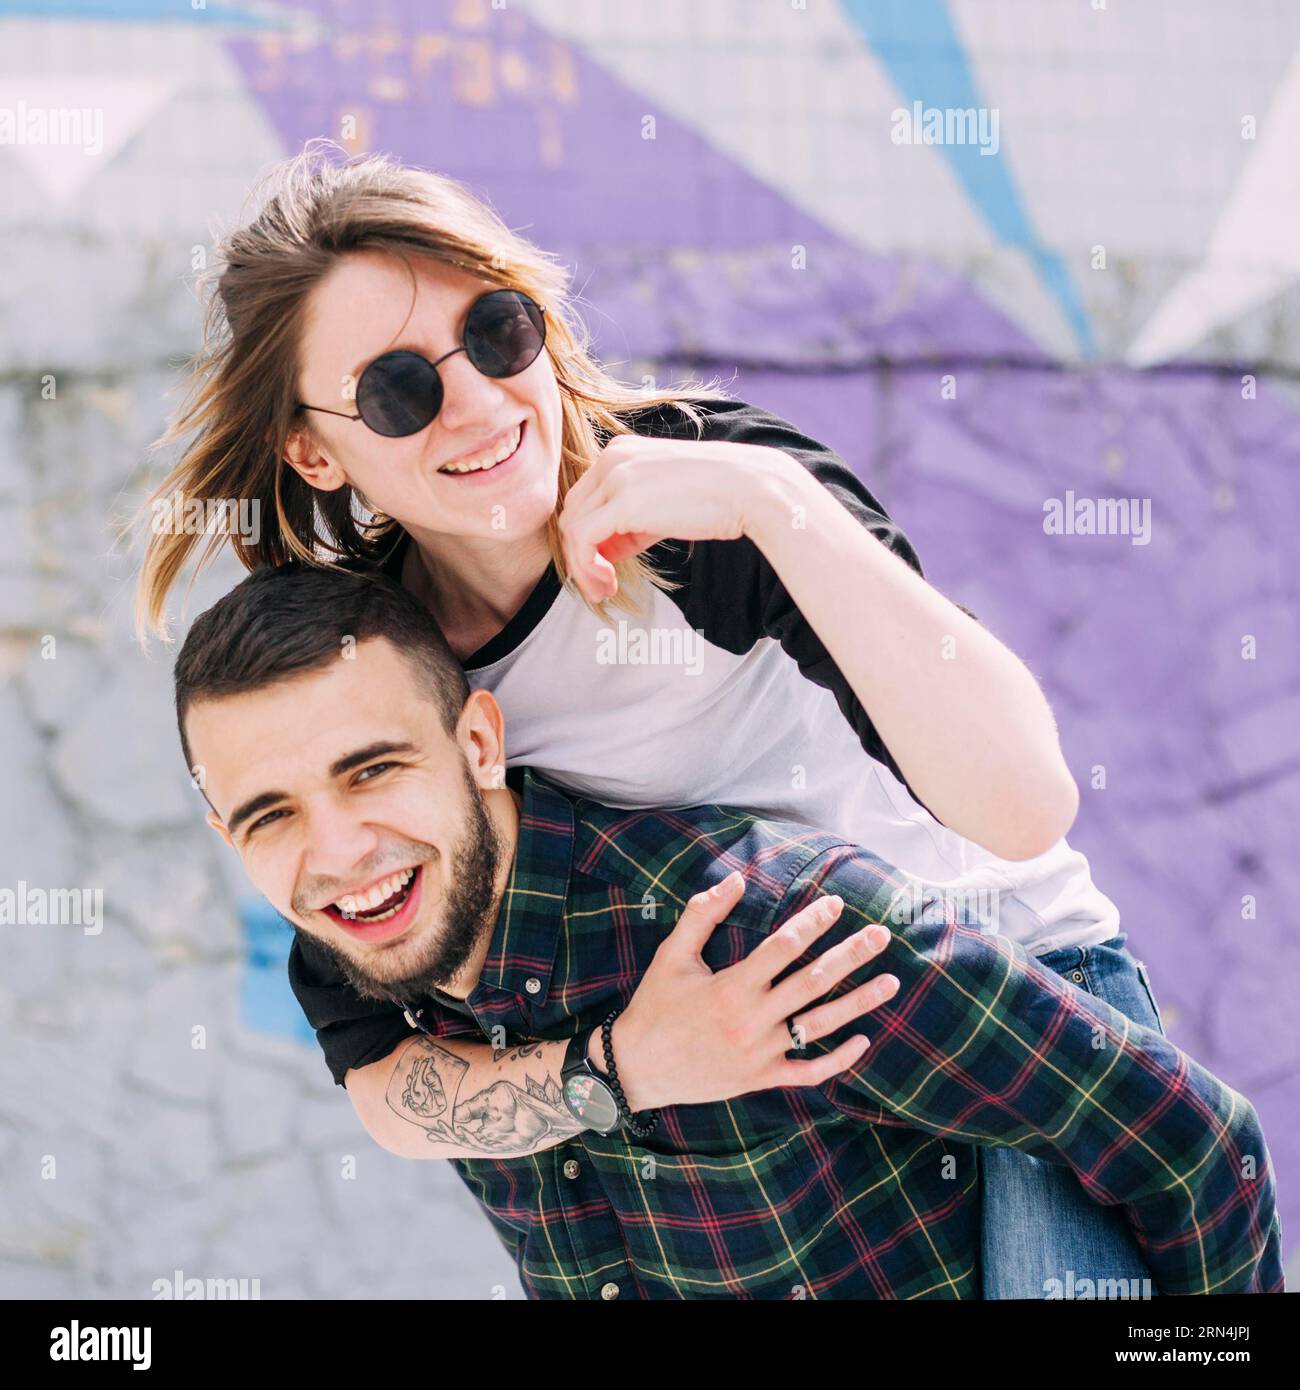 Handsome smiling young man taking her piggy ride his back Stock Photo